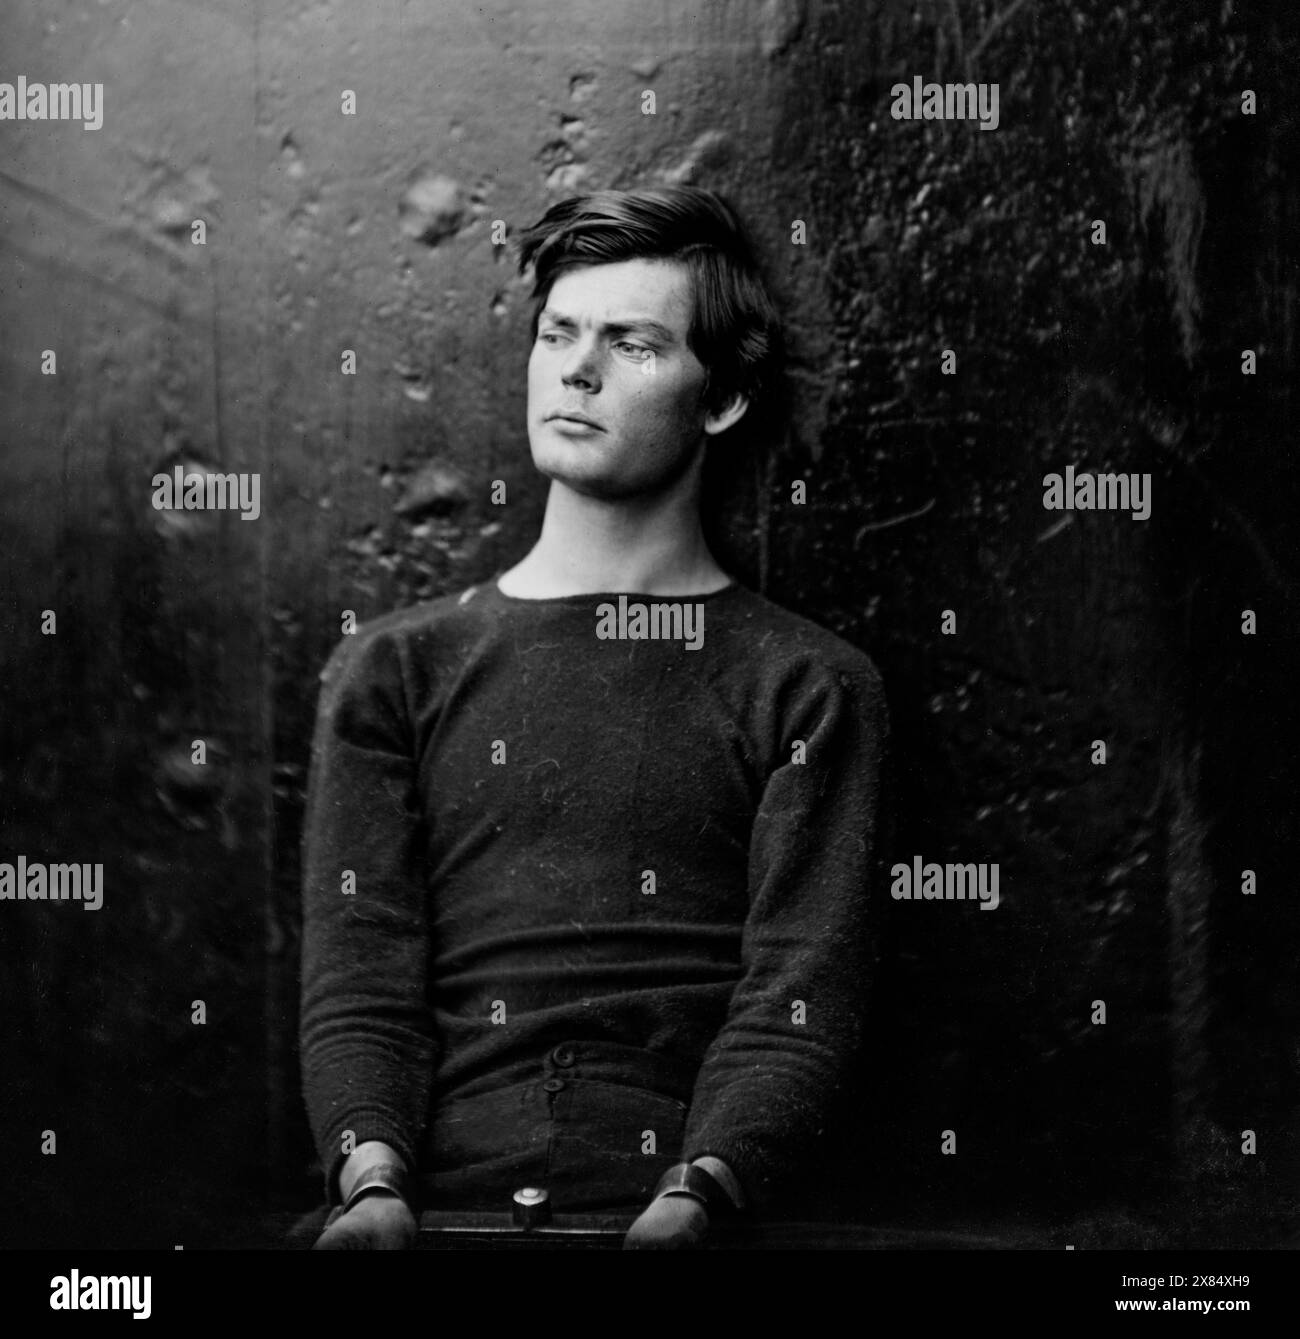 Lewis Powell (aka Lewis Payne), in sweater, seated and manacled, one of the conspirators in the Abraham Lincoln assassination. This photograph has background of dark metal, and was presumably taken on U.S.S. Saugus, where he was for a time confined. Washington Navy Yard, District of Columbia. 27 April 1865. By Alexander Gardner. Stock Photo